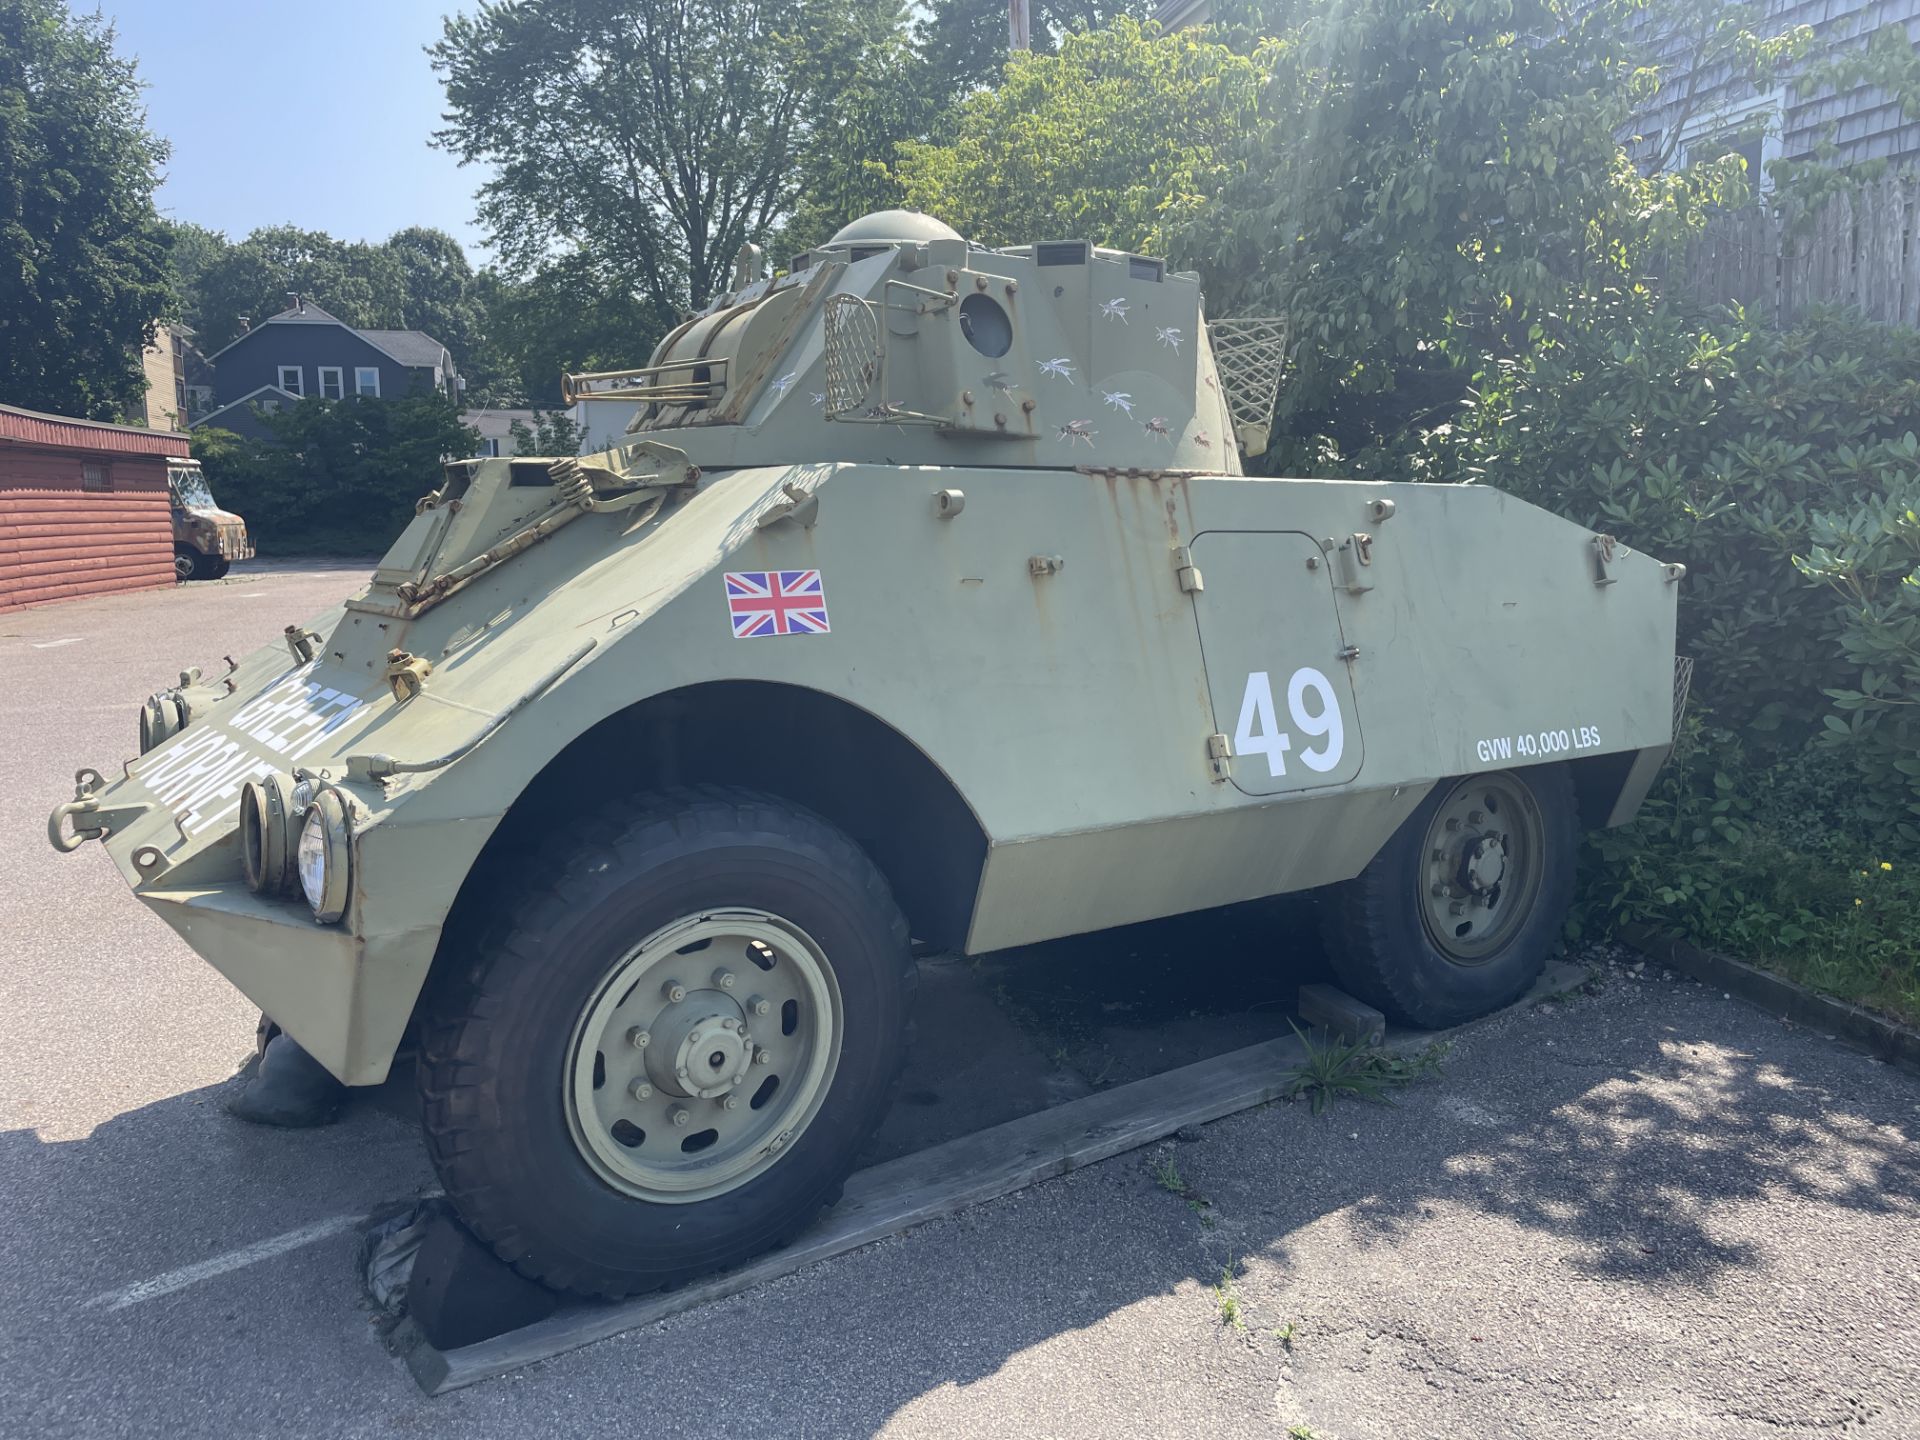 FN 4 RM 62F Armored Car As Seen in the film "Dogs of War" - Has Ford 6 Cylinder Motor and - Image 13 of 16